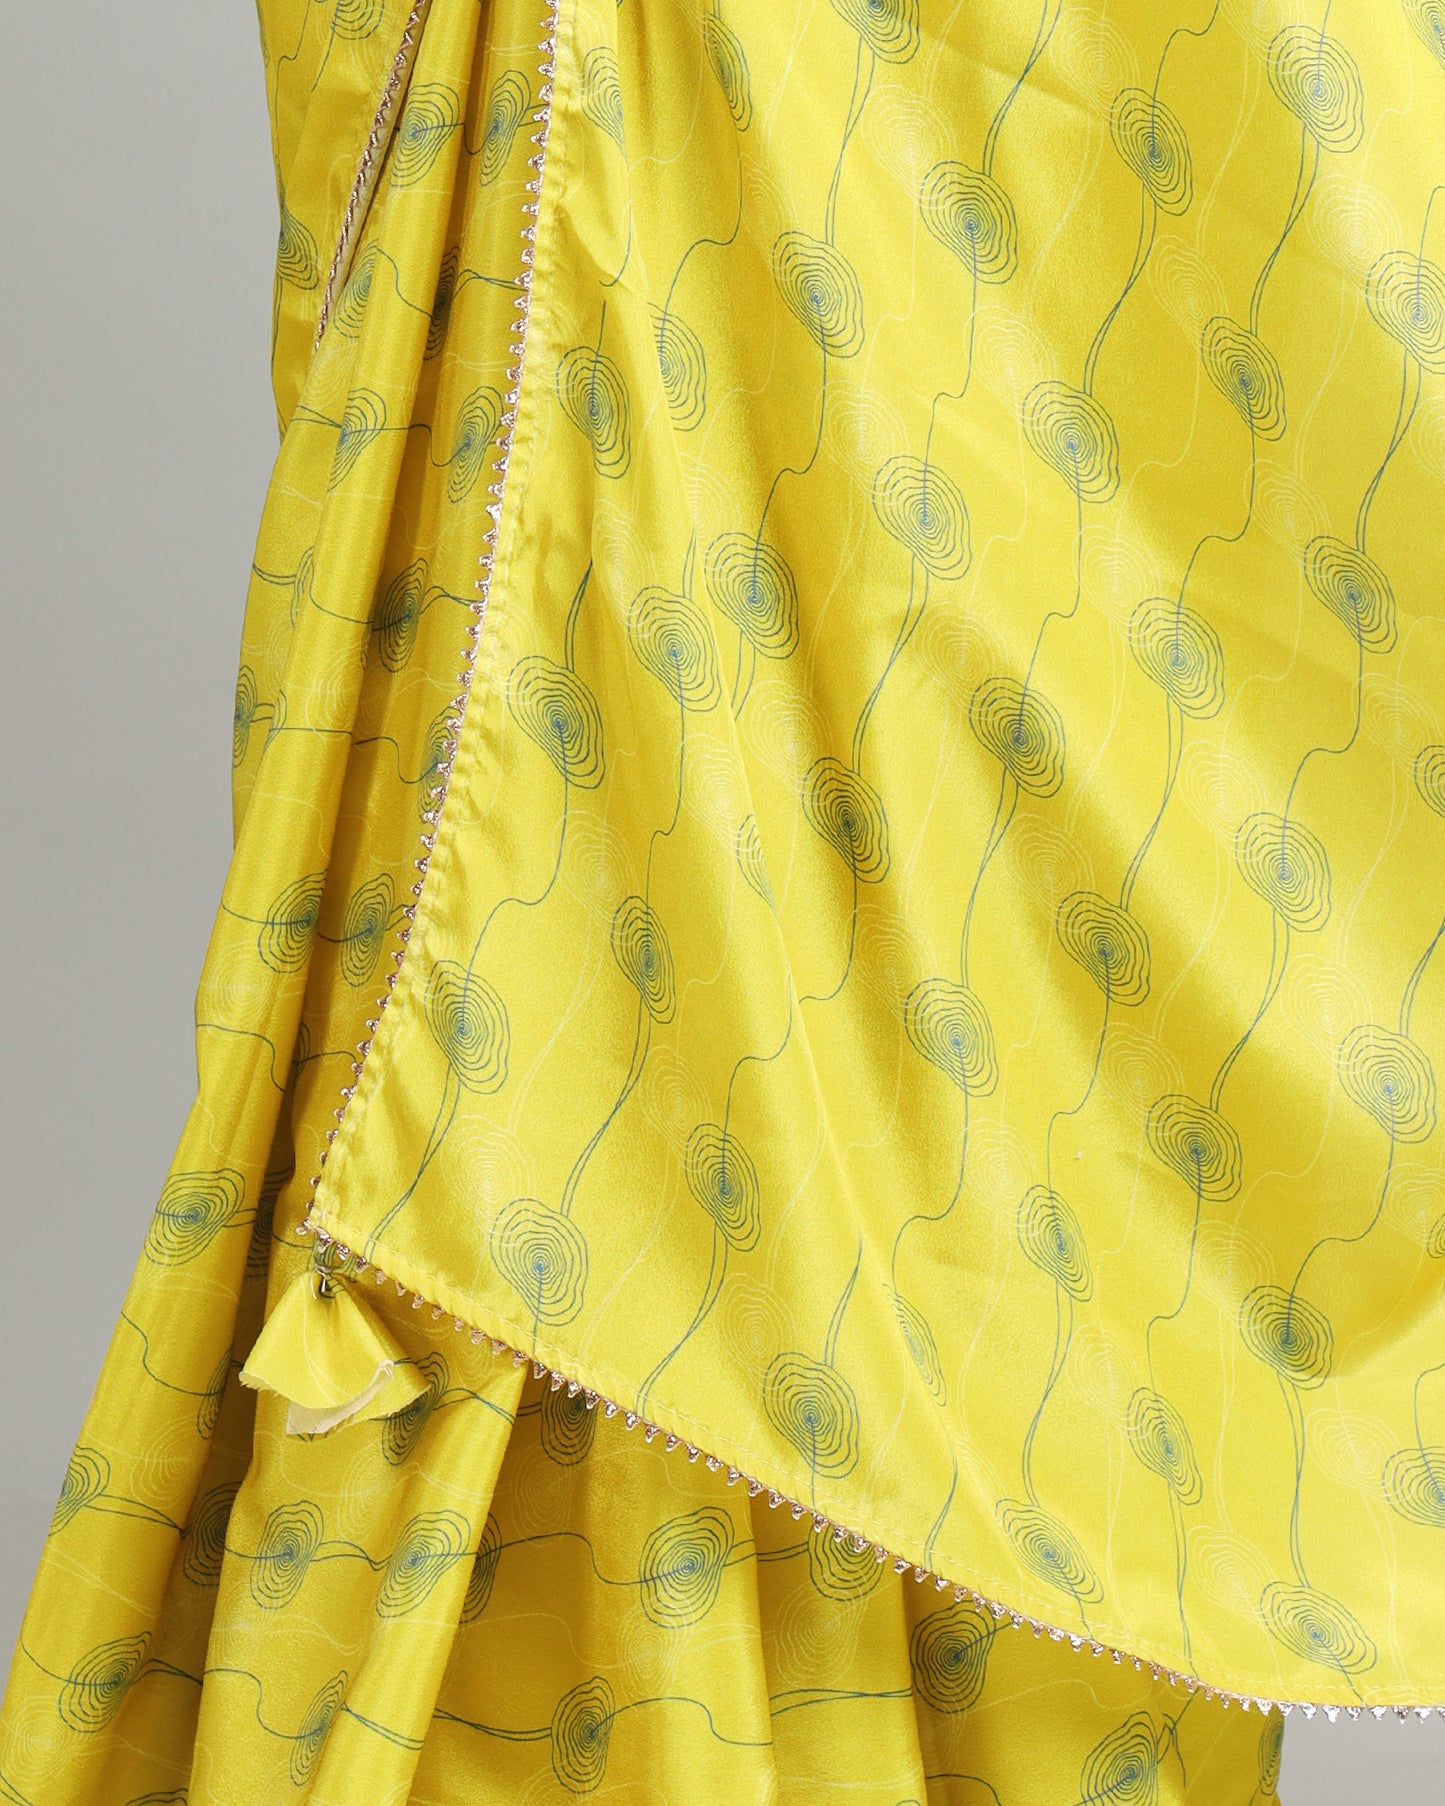 Cool Breeze, Silk Embrace: The Crafted Comfort Saree